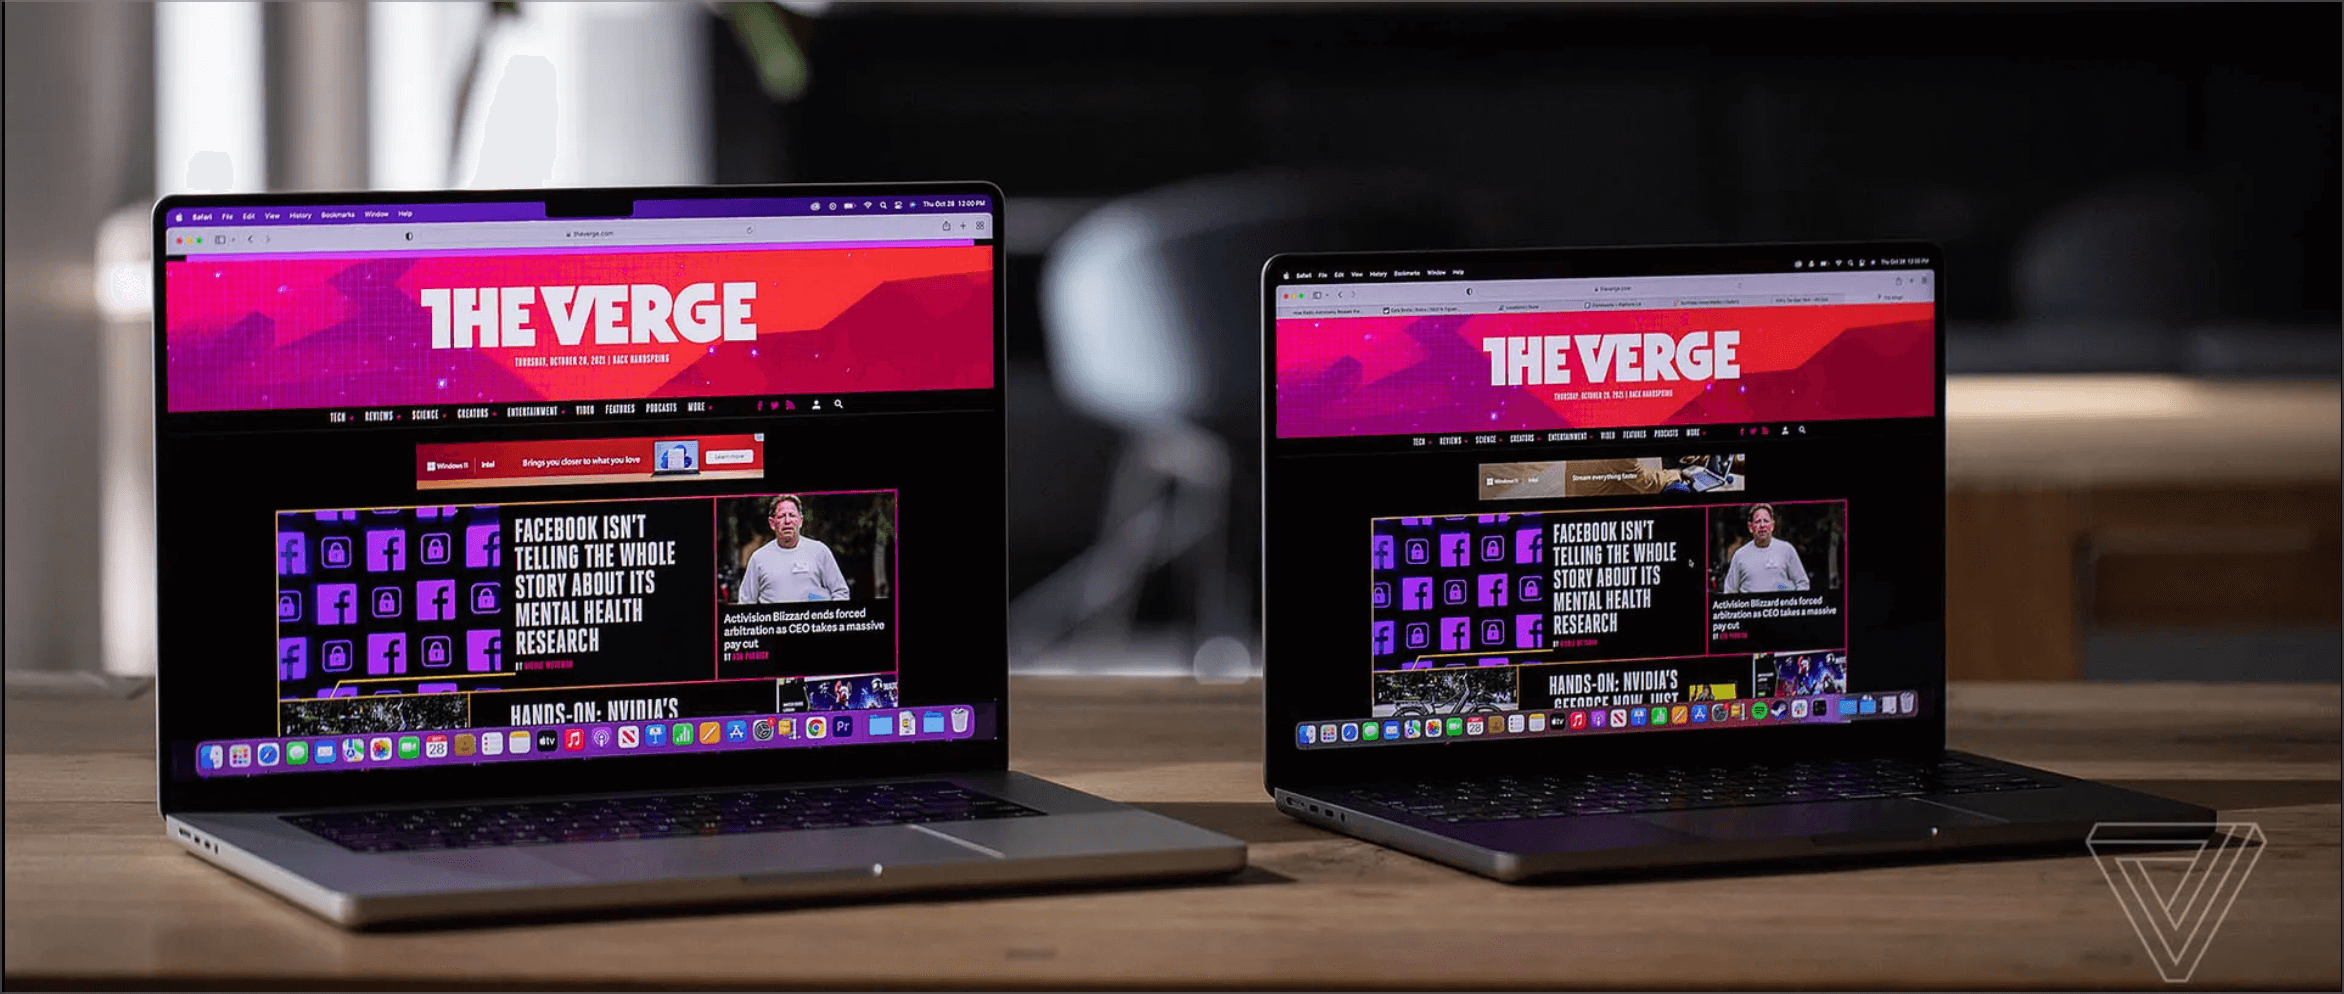 Reckless MacBook Pro battery tests by The Verge